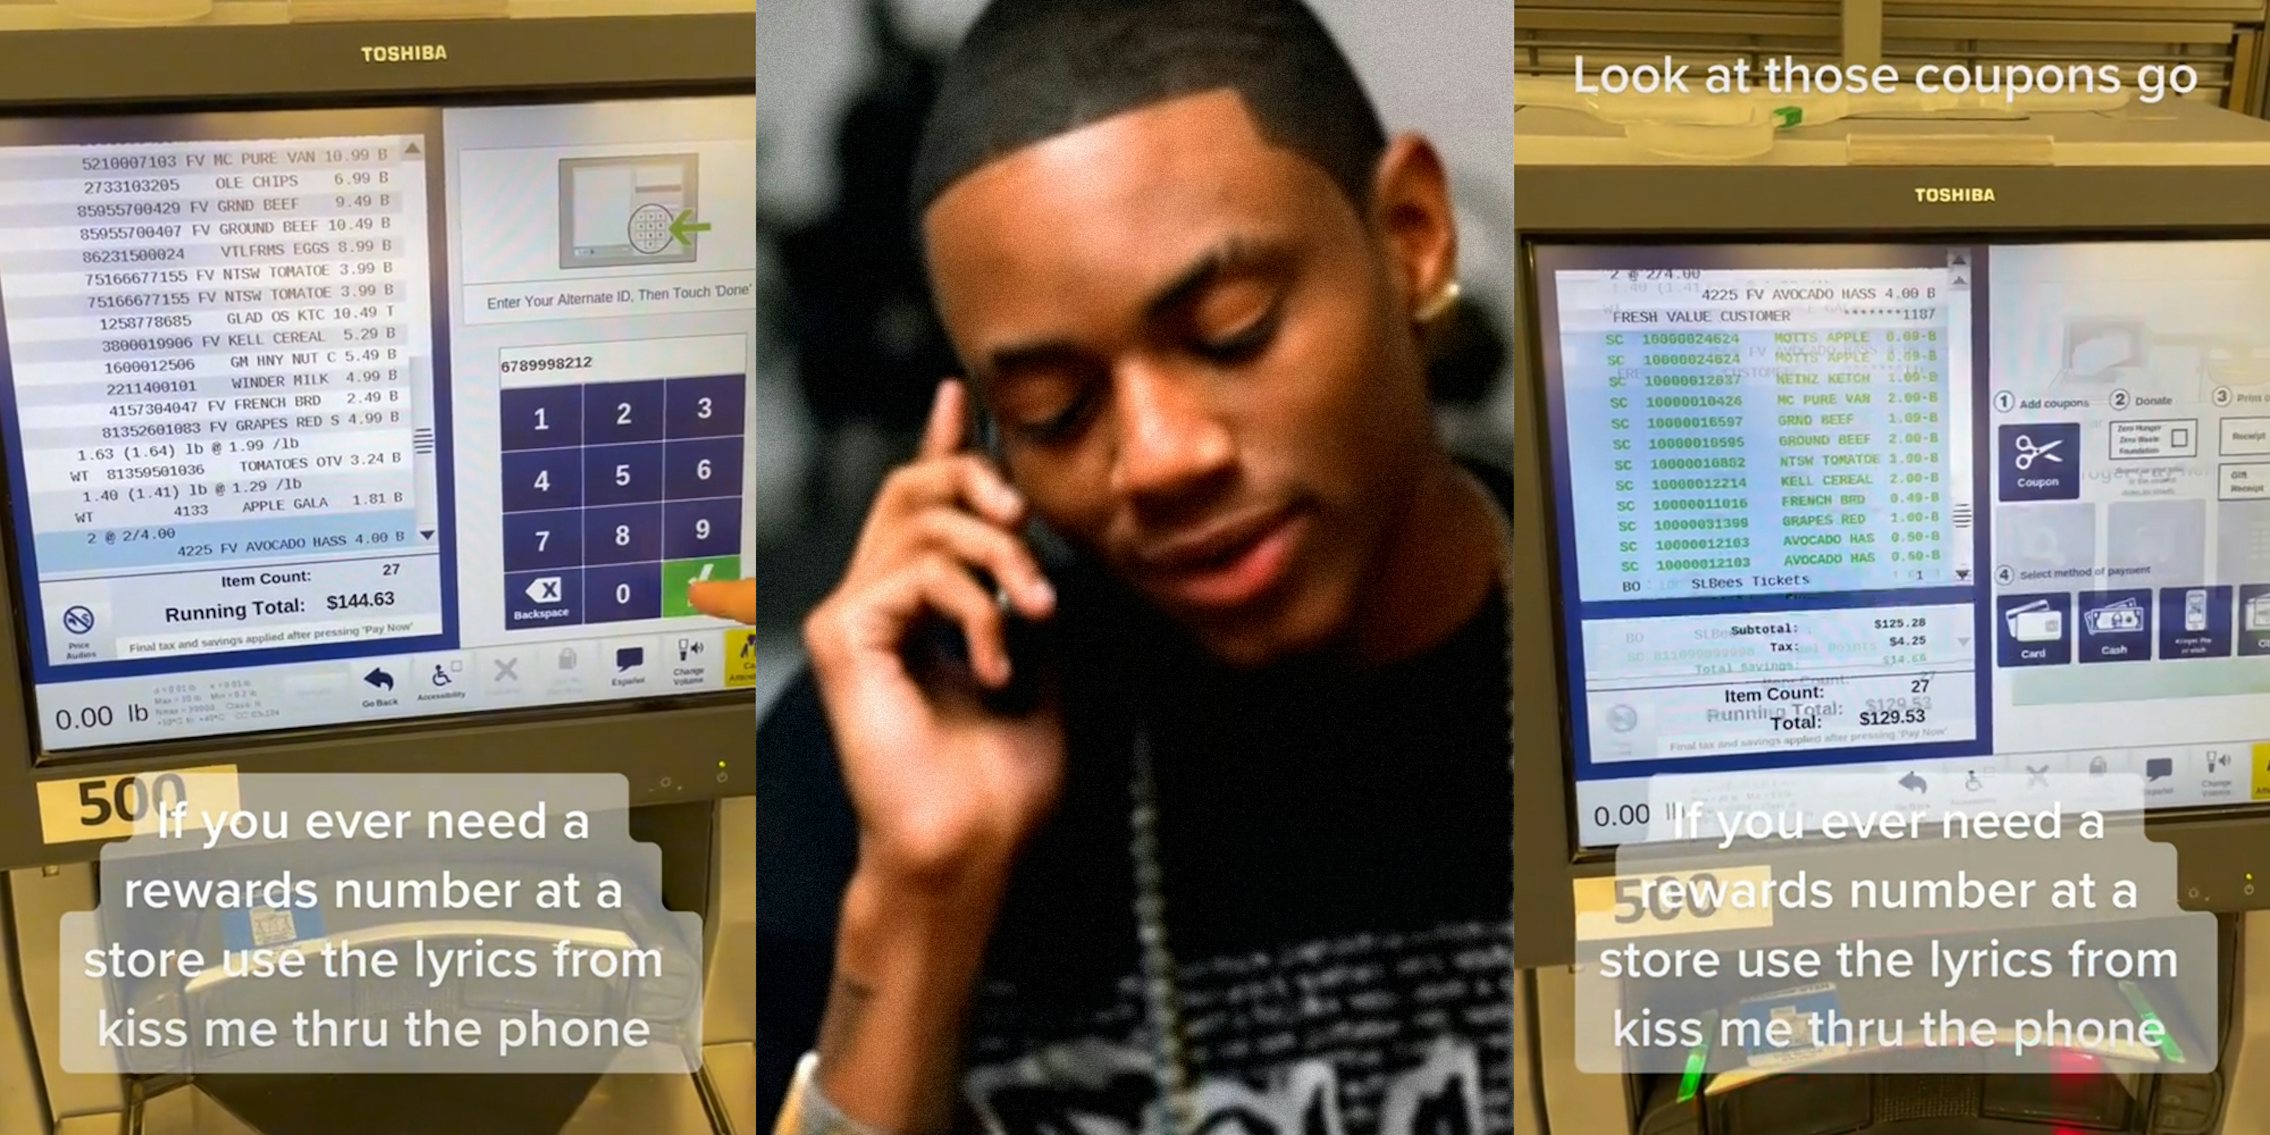 checkout with caption 'If you ever need a rewards number at a store use the lyrics from kiss me thru the phone' (l&r) soulja boy on phone (c)